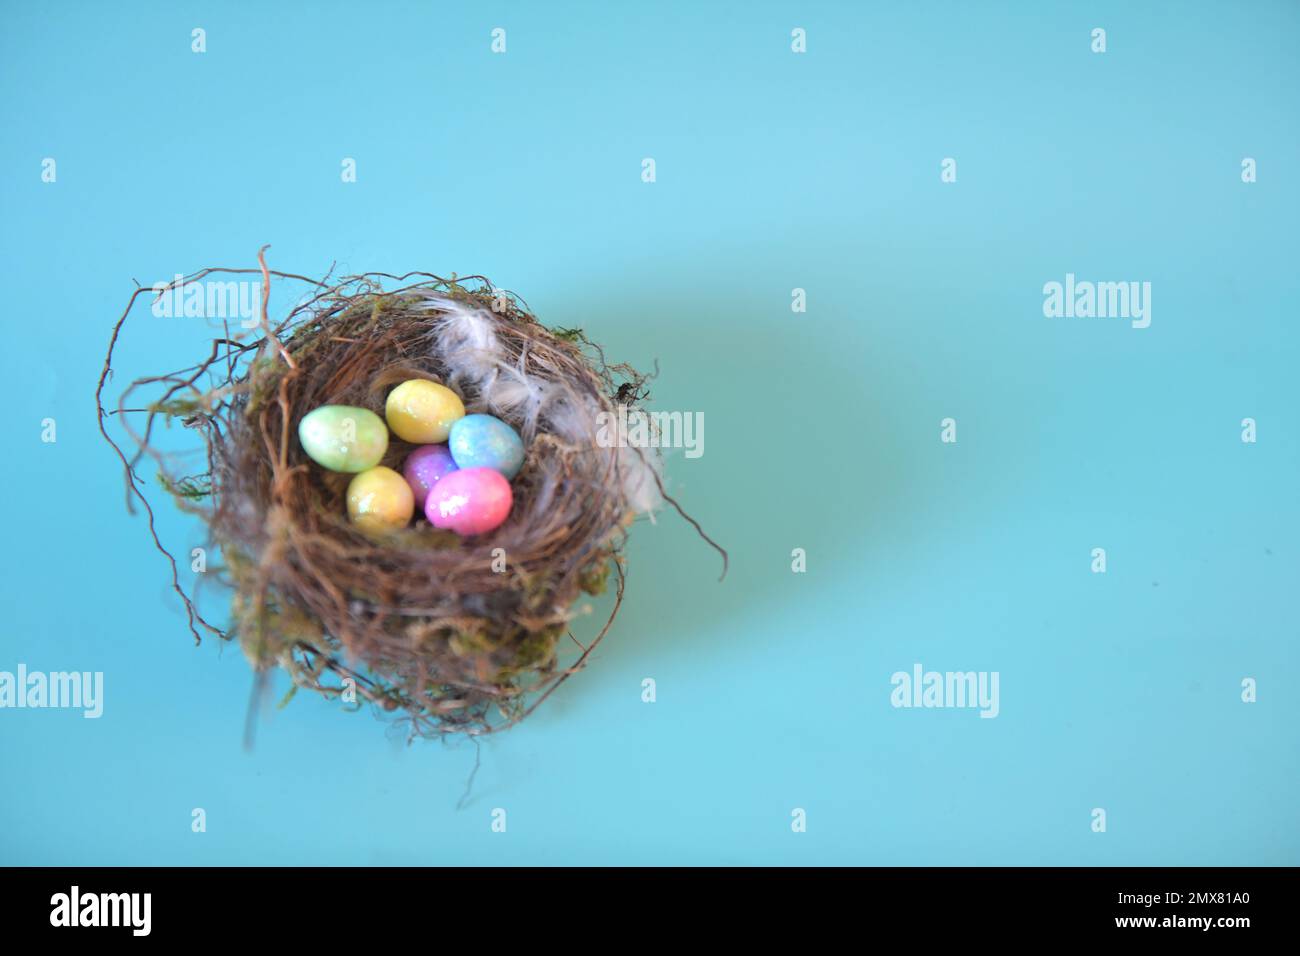 Colorful Easter eggs in real bird's nest. Horizontal photo with copy space to the right. Stock Photo